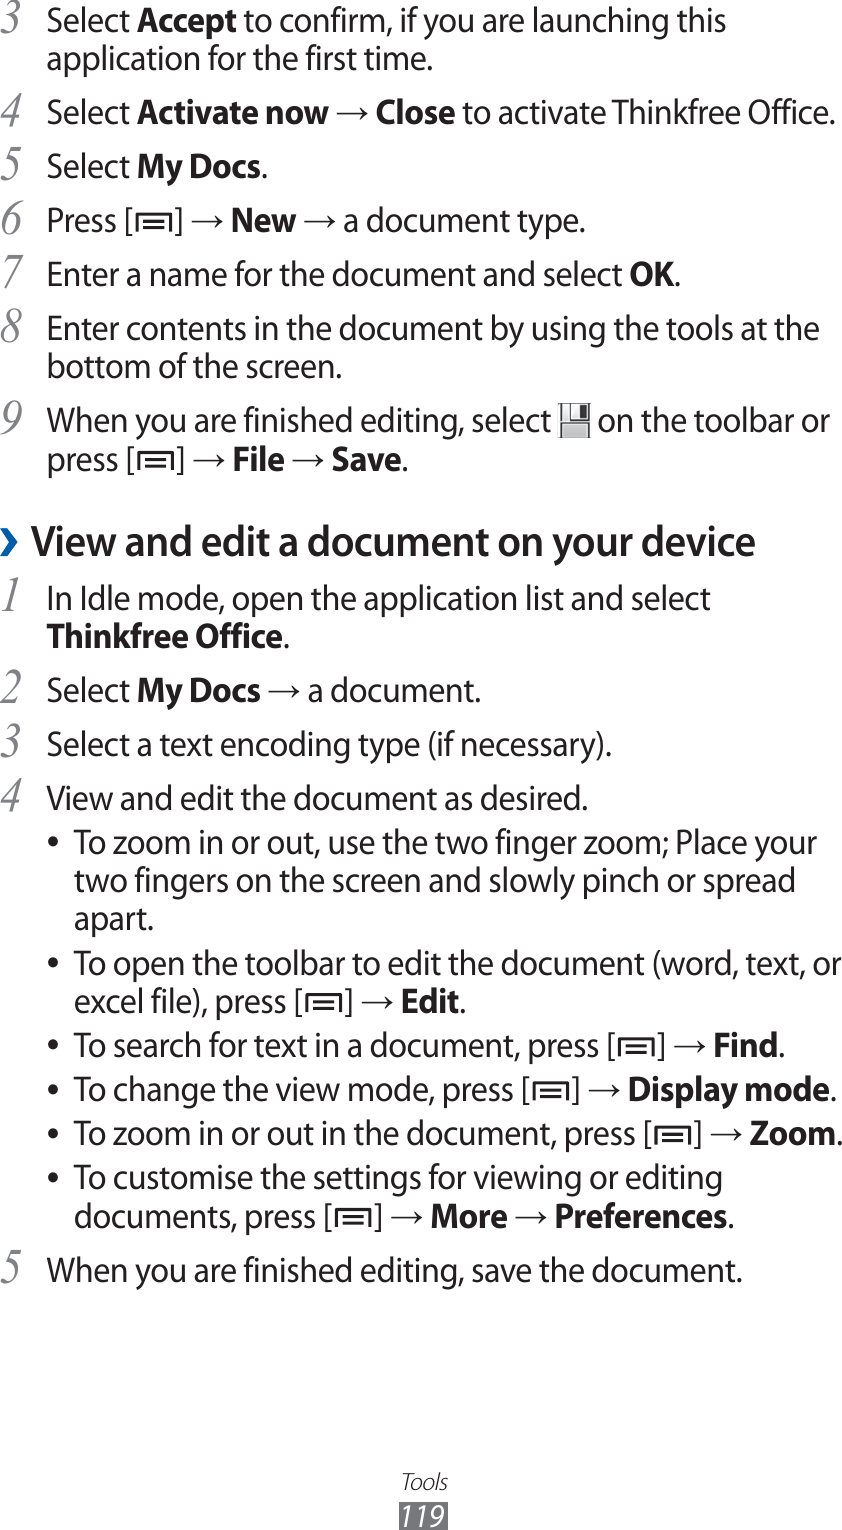 Tools119Select 3 Accept to confirm, if you are launching this application for the first time.Select 4 Activate now → Close to activate Thinkfree Office.Select 5 My Docs.Press [6 ] → New → a document type.Enter a name for the document and select 7 OK.Enter contents in the document by using the tools at the 8 bottom of the screen.When you are finished editing, select 9  on the toolbar or press [ ] → File → Save.View and edit a document on your device ›In Idle mode, open the application list and select 1 Thinkfree Office.Select 2 My Docs → a document.Select a text encoding type (if necessary).3 View and edit the document as desired.4 To zoom in or out, use the two finger zoom; Place your  ●two fingers on the screen and slowly pinch or spread apart.To open the toolbar to edit the document (word, text, or  ●excel file), press [ ] → Edit.To search for text in a document, press [ ●] → Find.To change the view mode, press [ ●] → Display mode.To zoom in or out in the document, press [ ●] → Zoom.To customise the settings for viewing or editing  ●documents, press [ ] → More → Preferences.When you are finished editing, save the document.5 